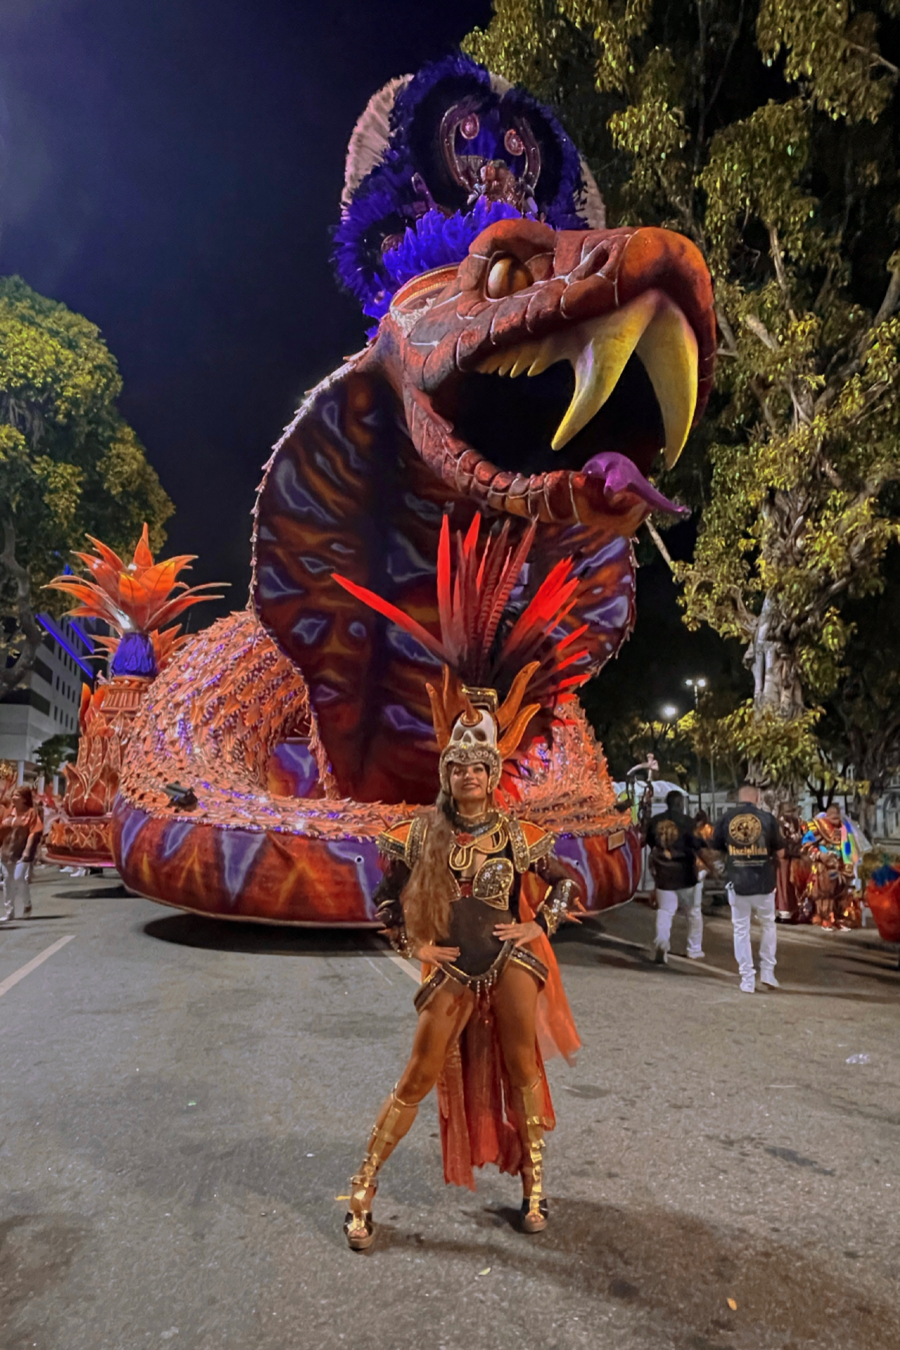 Gisella Ferreira stands in front of a large carnival parade float of a snake while wearing samba attire